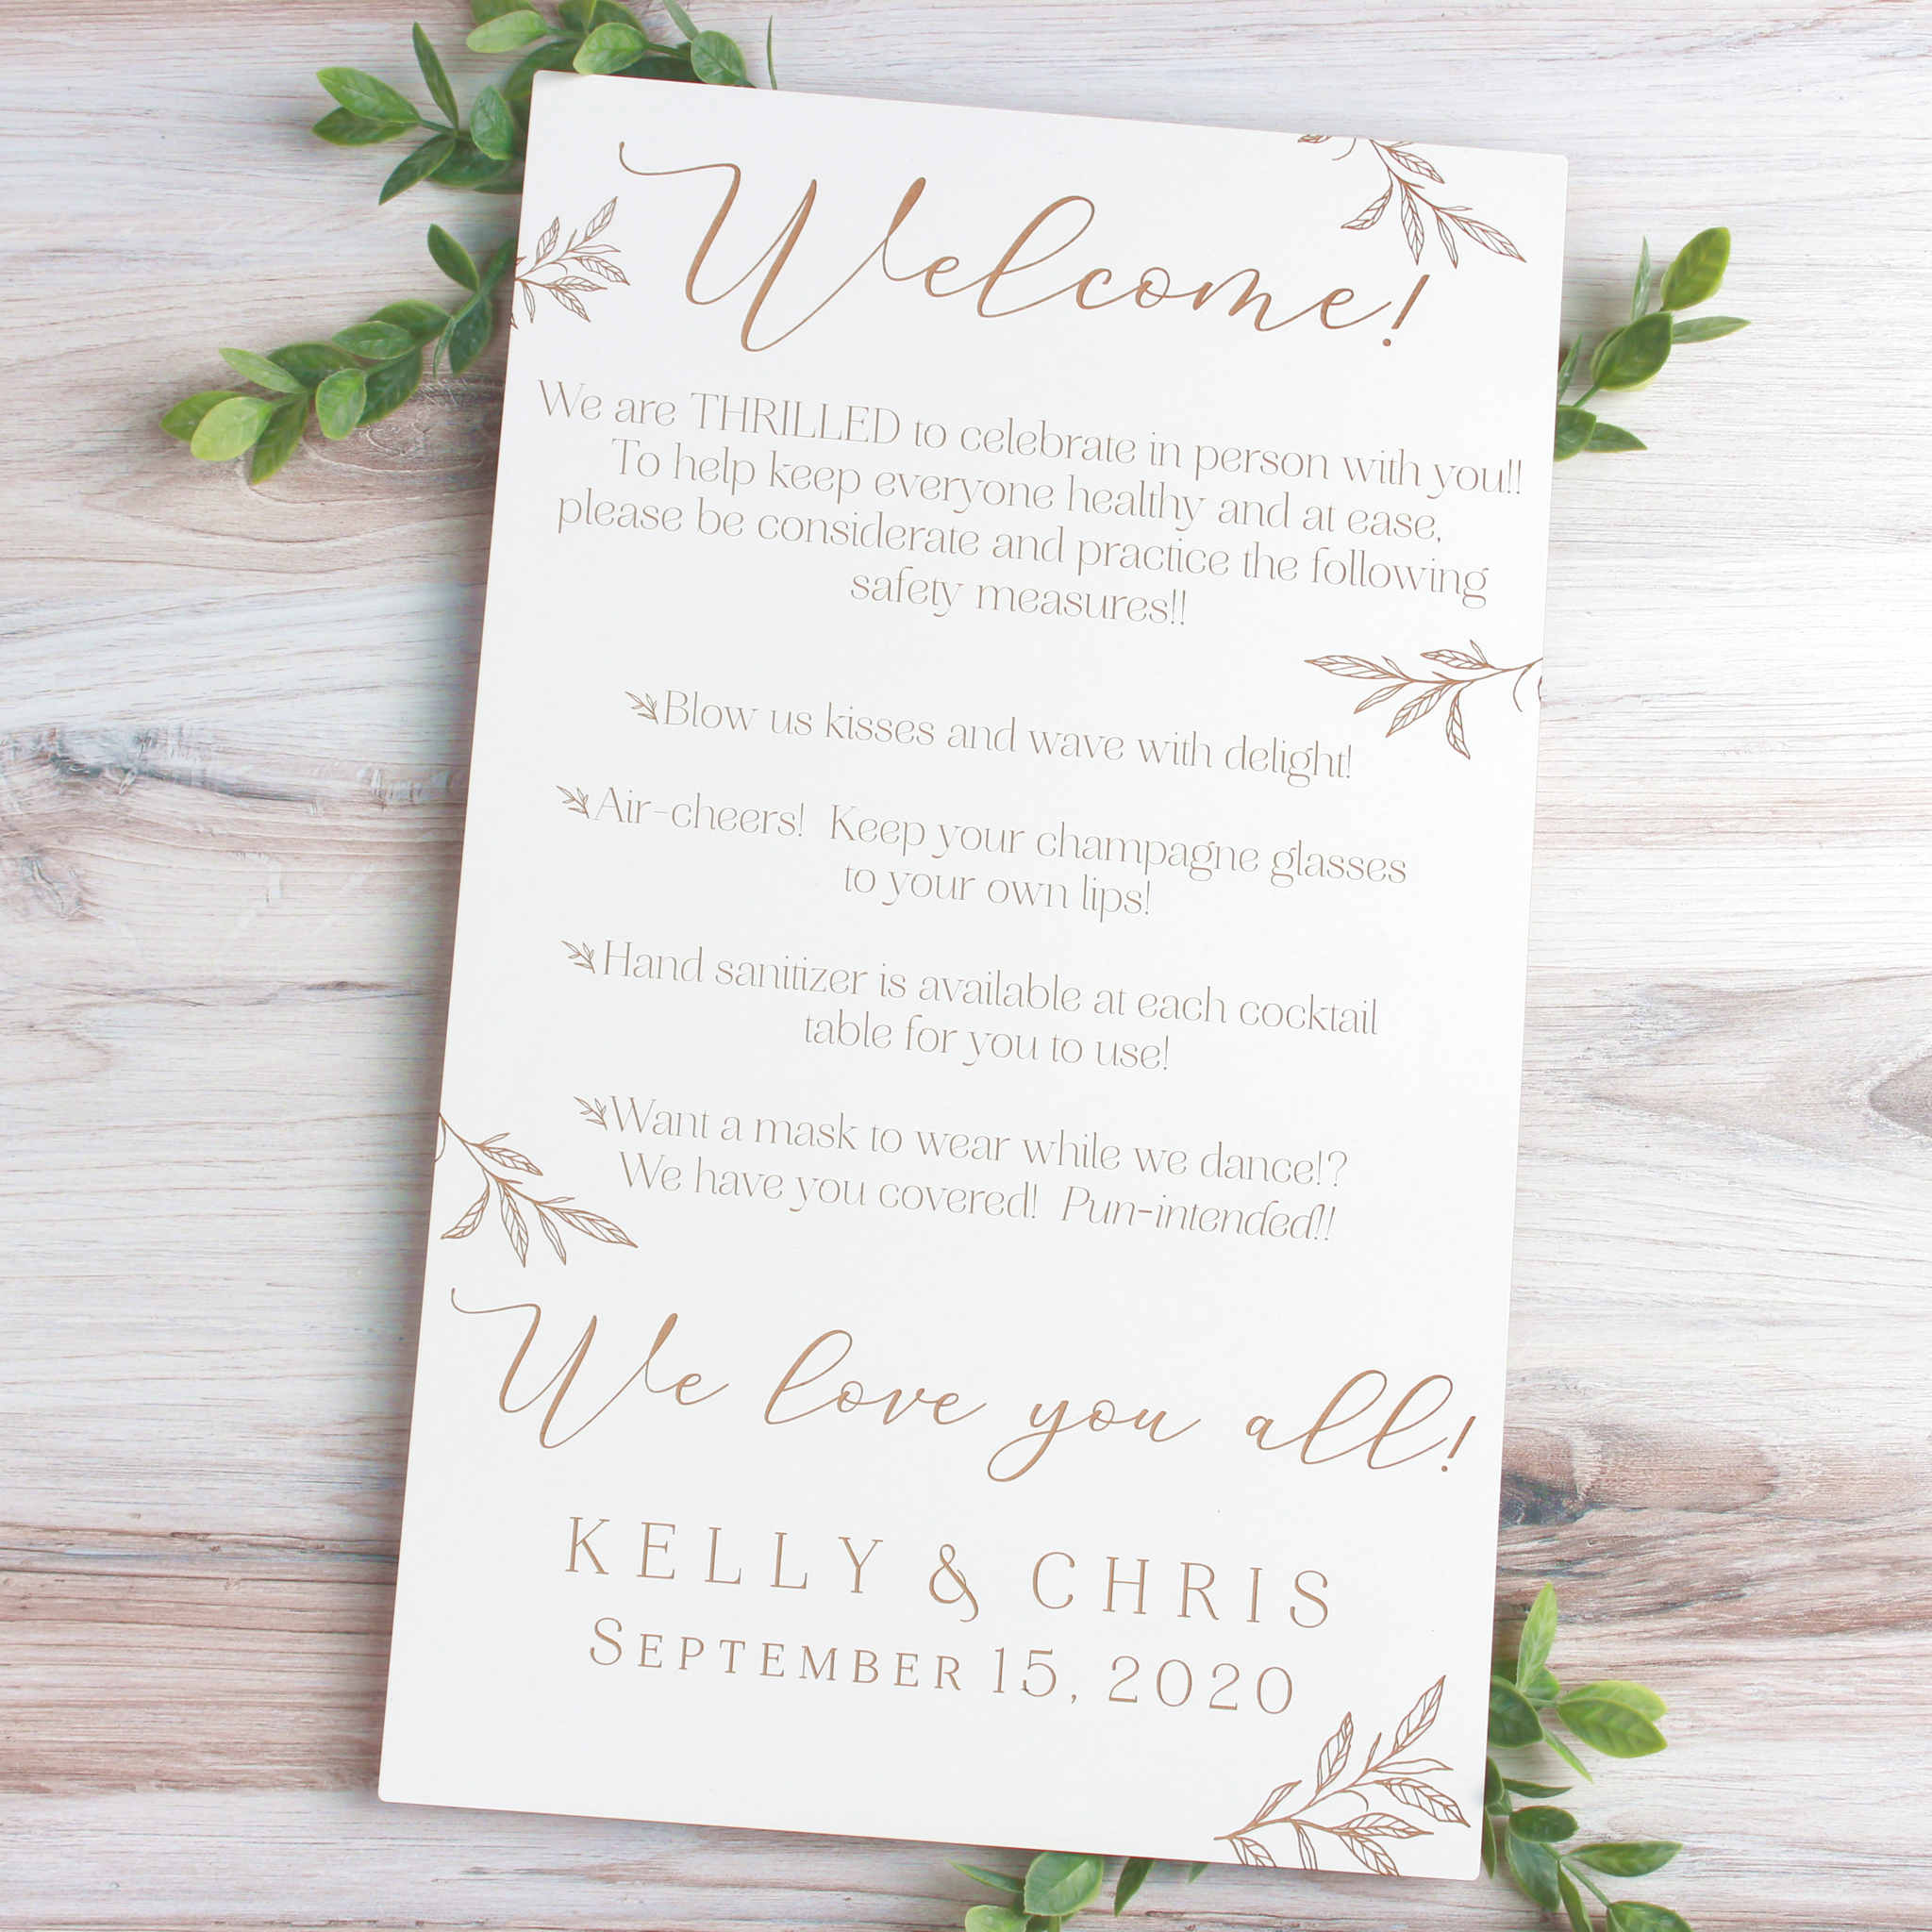 Details about   DIY Wedding Save the Date Evening Cards Write Your Own Invites Day Night RSVP 22 